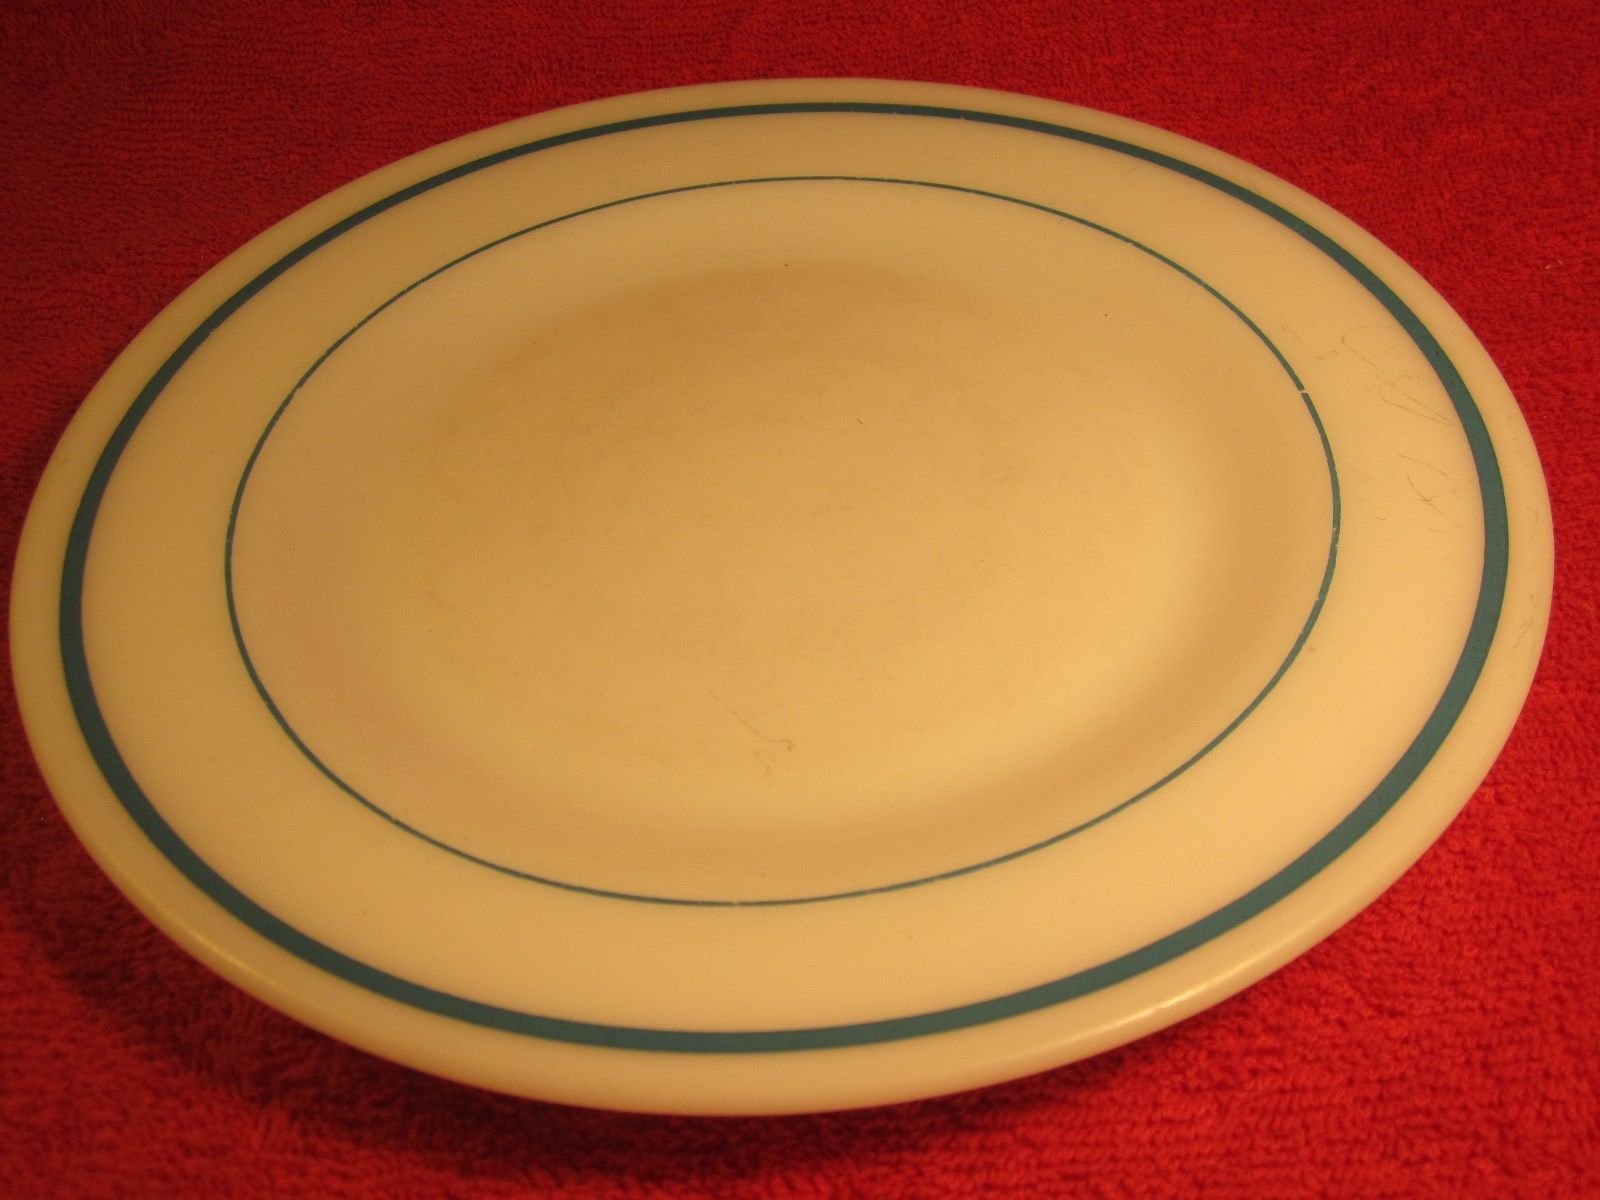 Primary image for Vintage FIRE KING 9" Dinner Plate WHITE with blue rings bands [Z184]